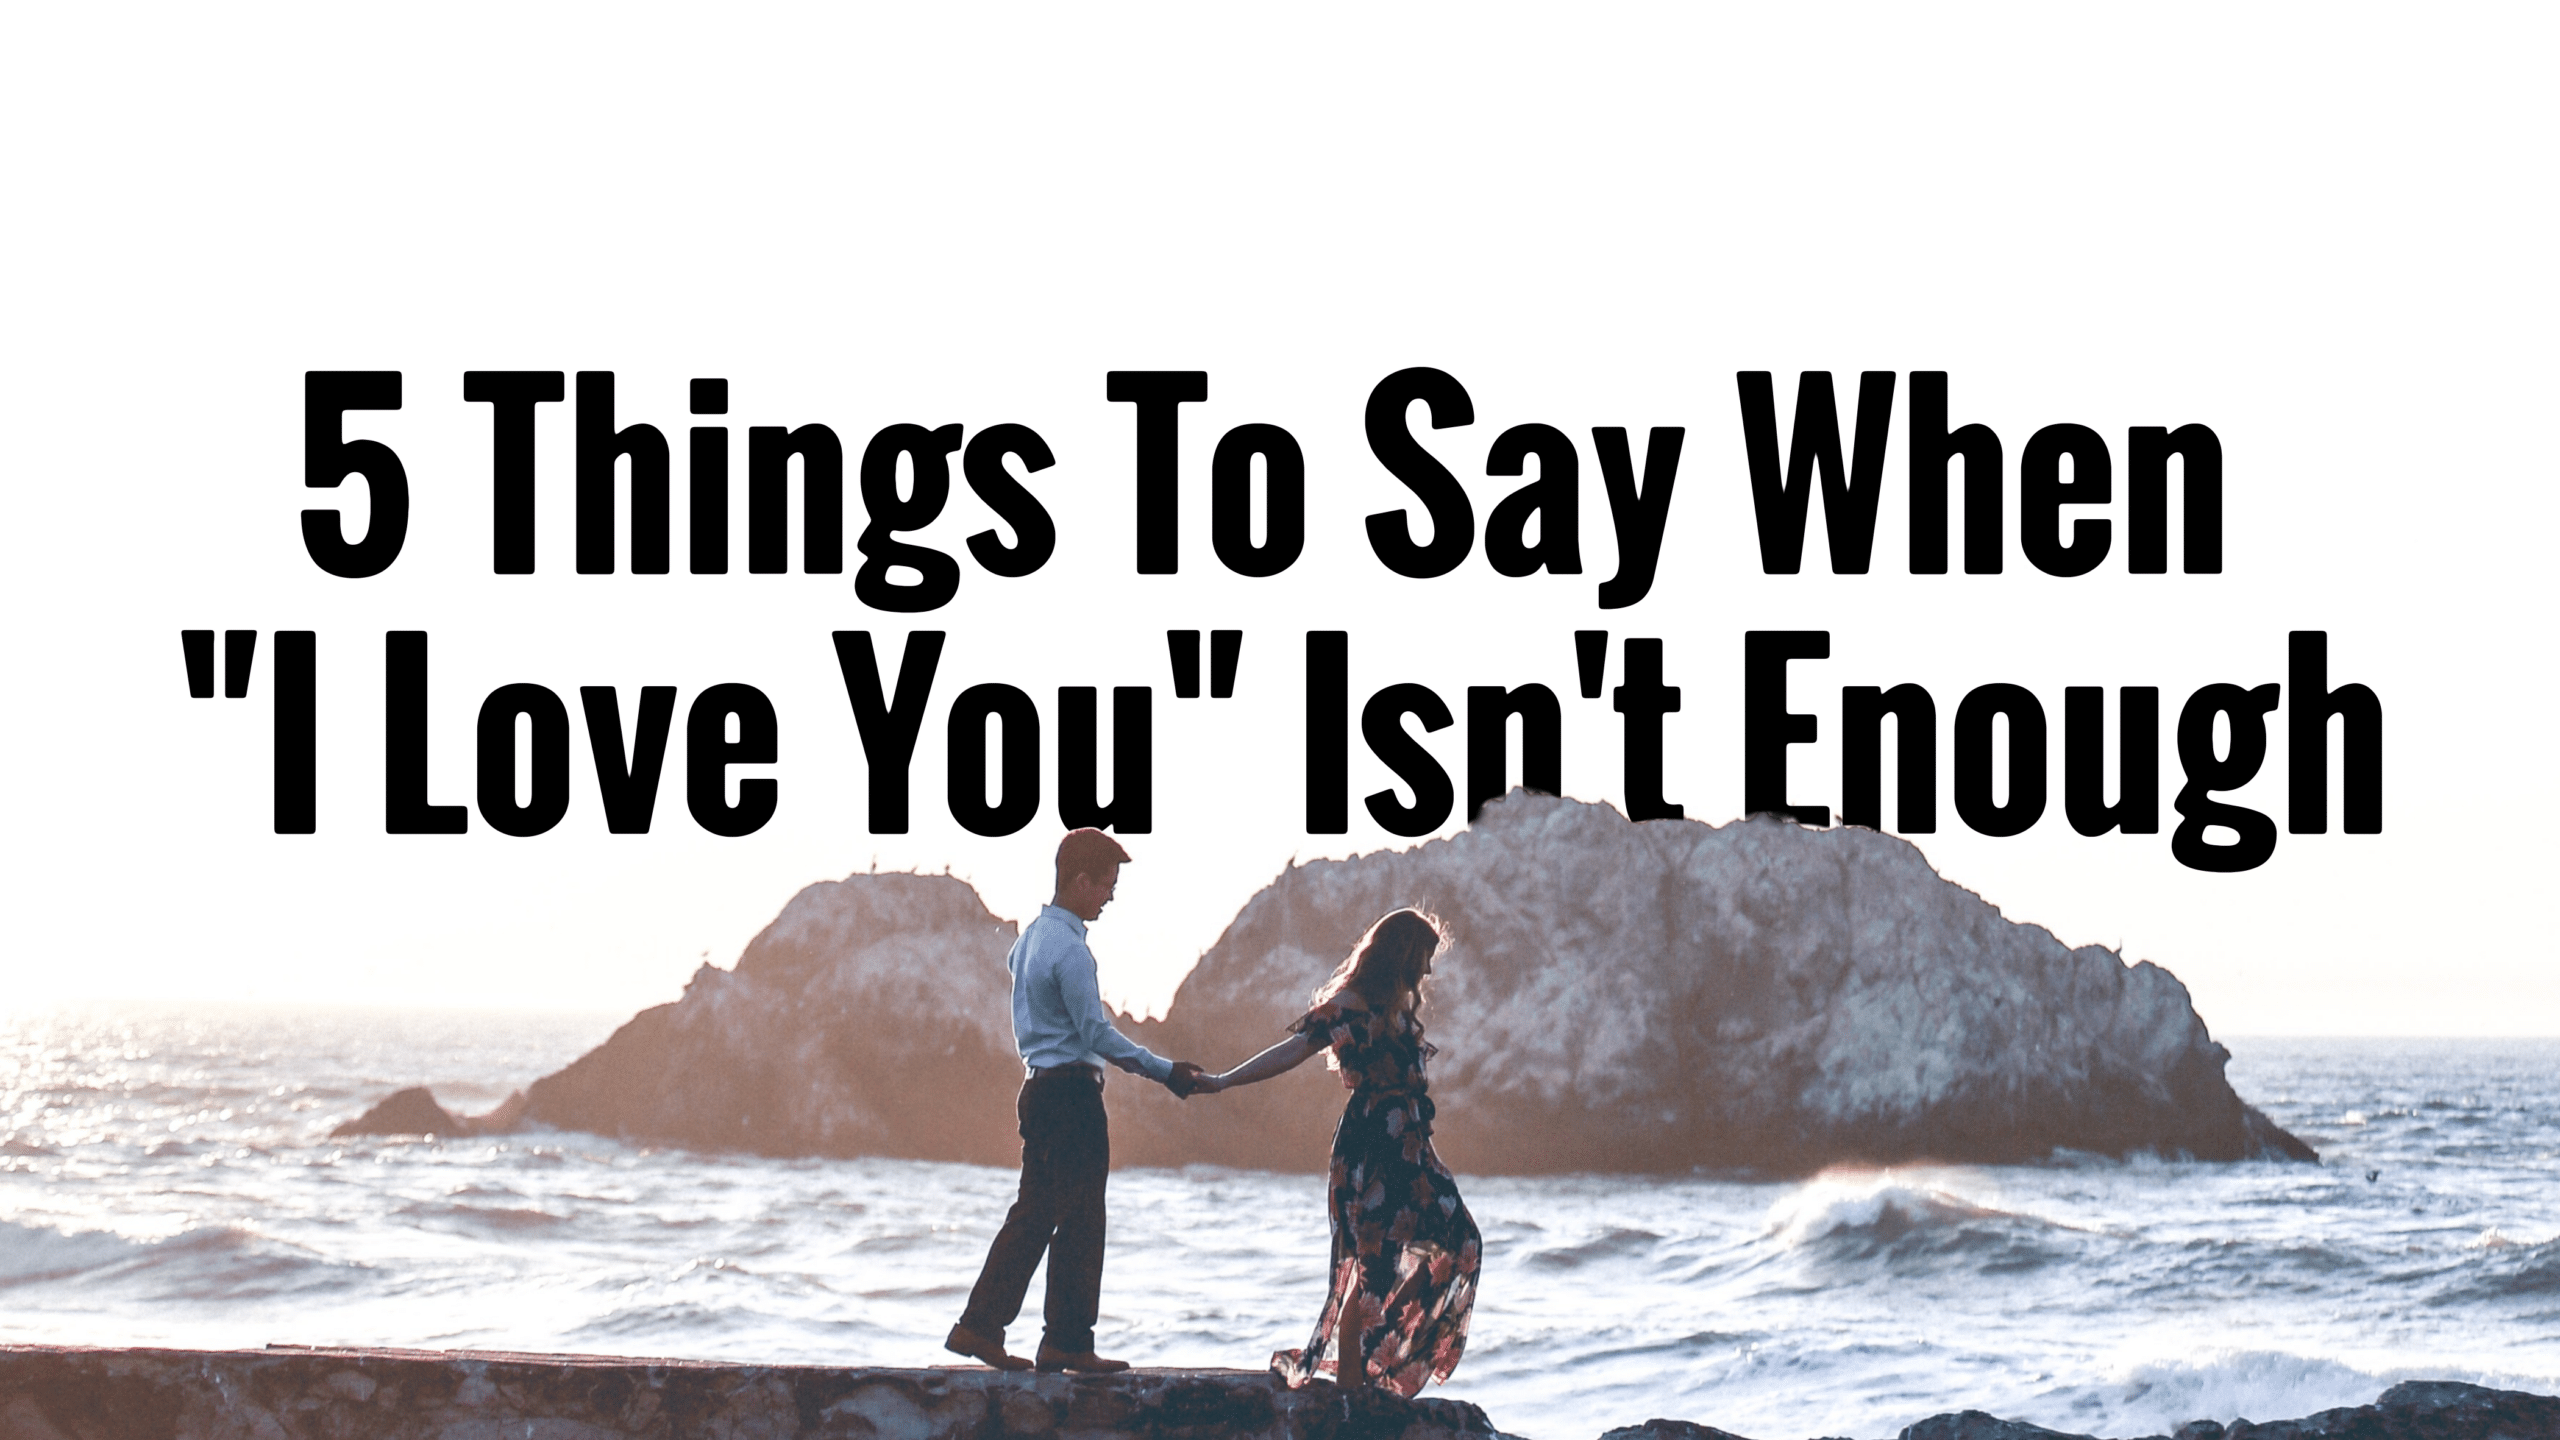 5 Things To Say When “I Love You” Isn’t Enough